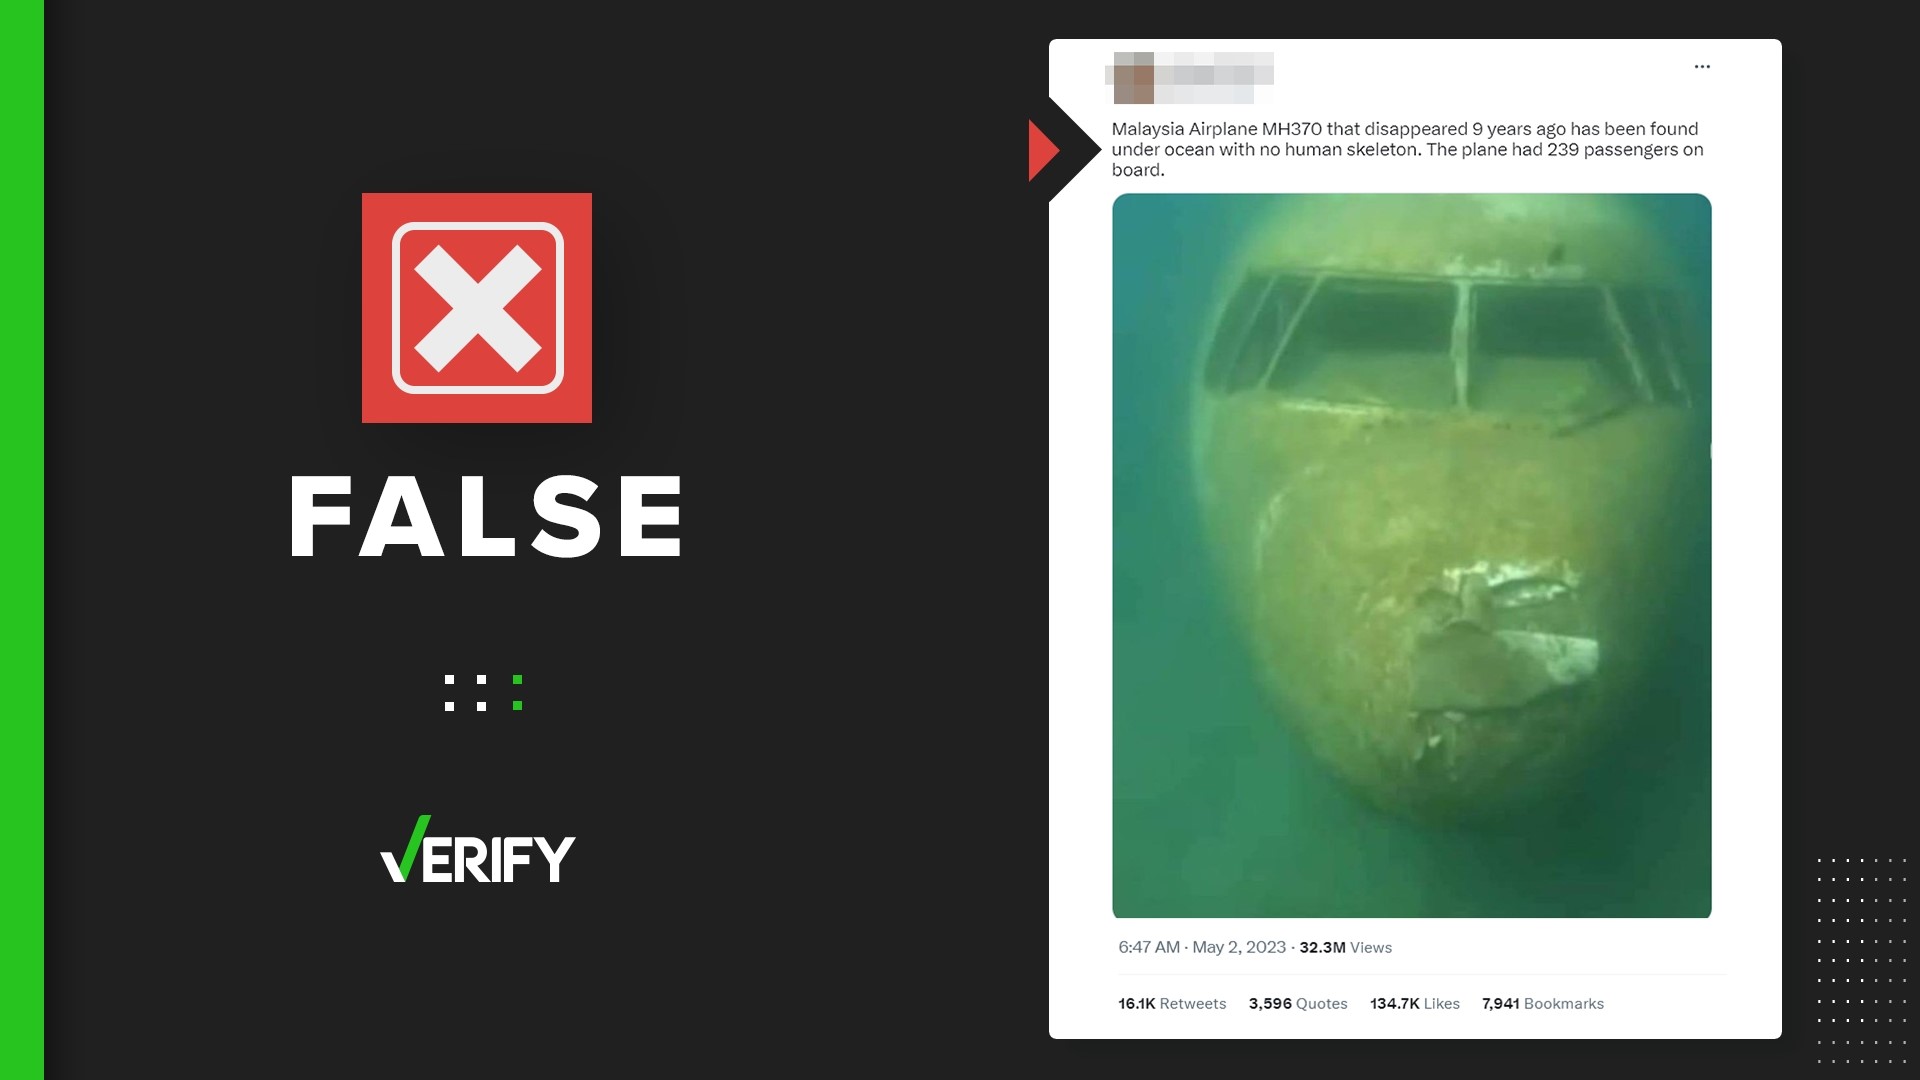 Here’s how we VERIFIED that the viral photo actually shows a different airplane that was deliberately sunk in Jordan’s Red Sea.